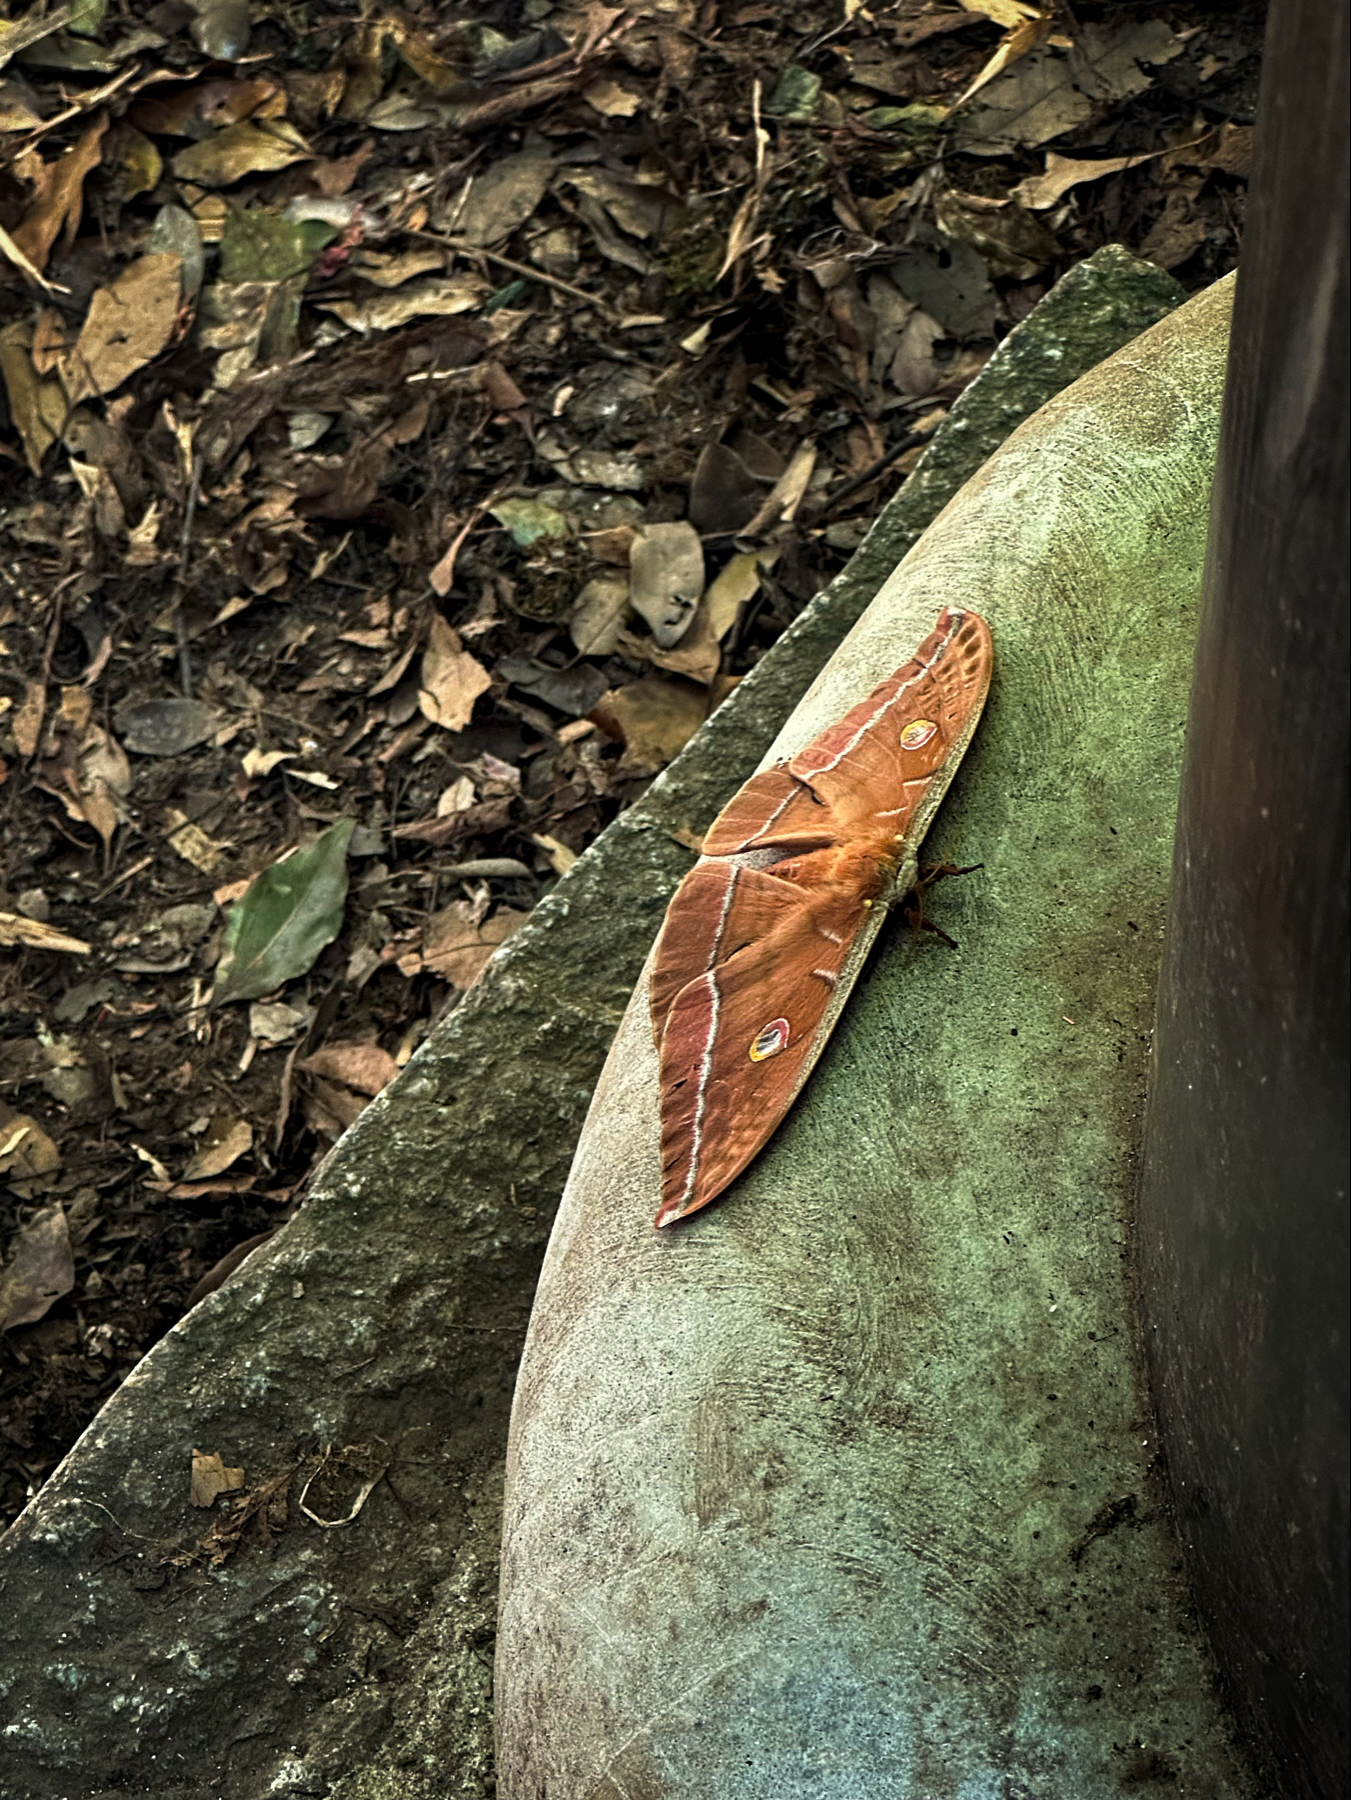 A large brown moth with distinctive eye spots on its wings resting on a green, moss-covered stone bench, with leaf litter in the background.